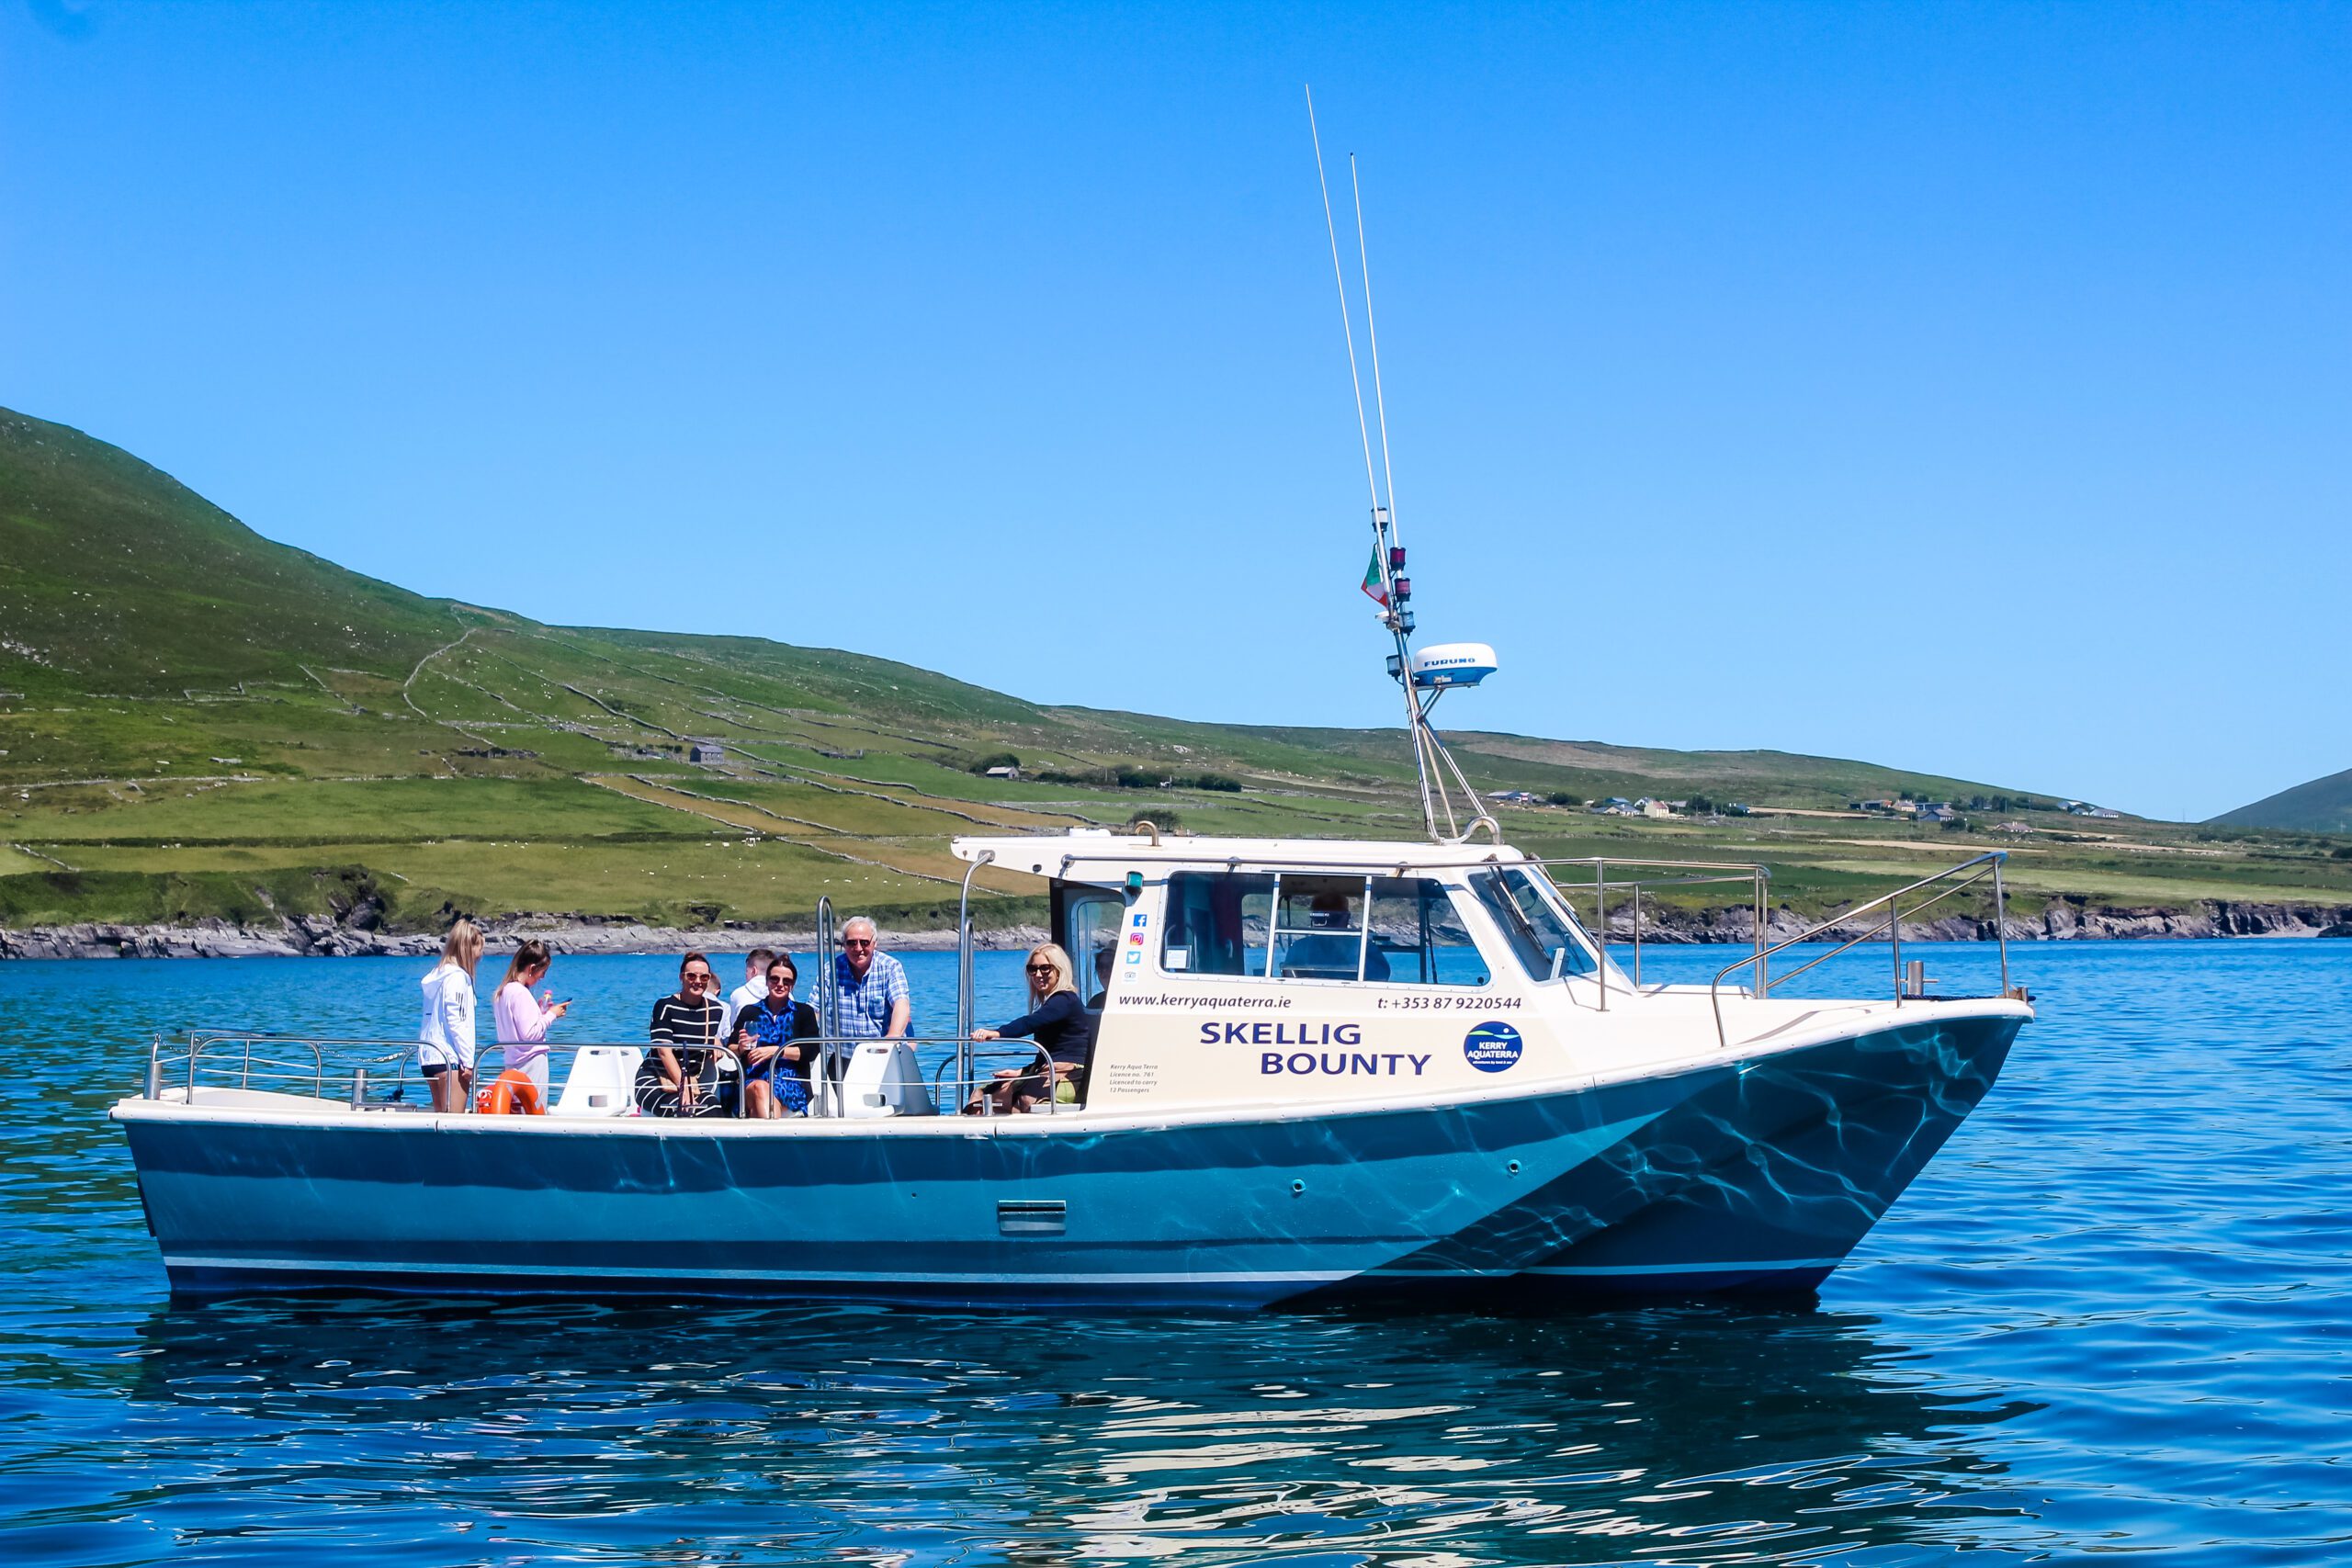 A family group abroad a private charter sailing along the Skellig coast